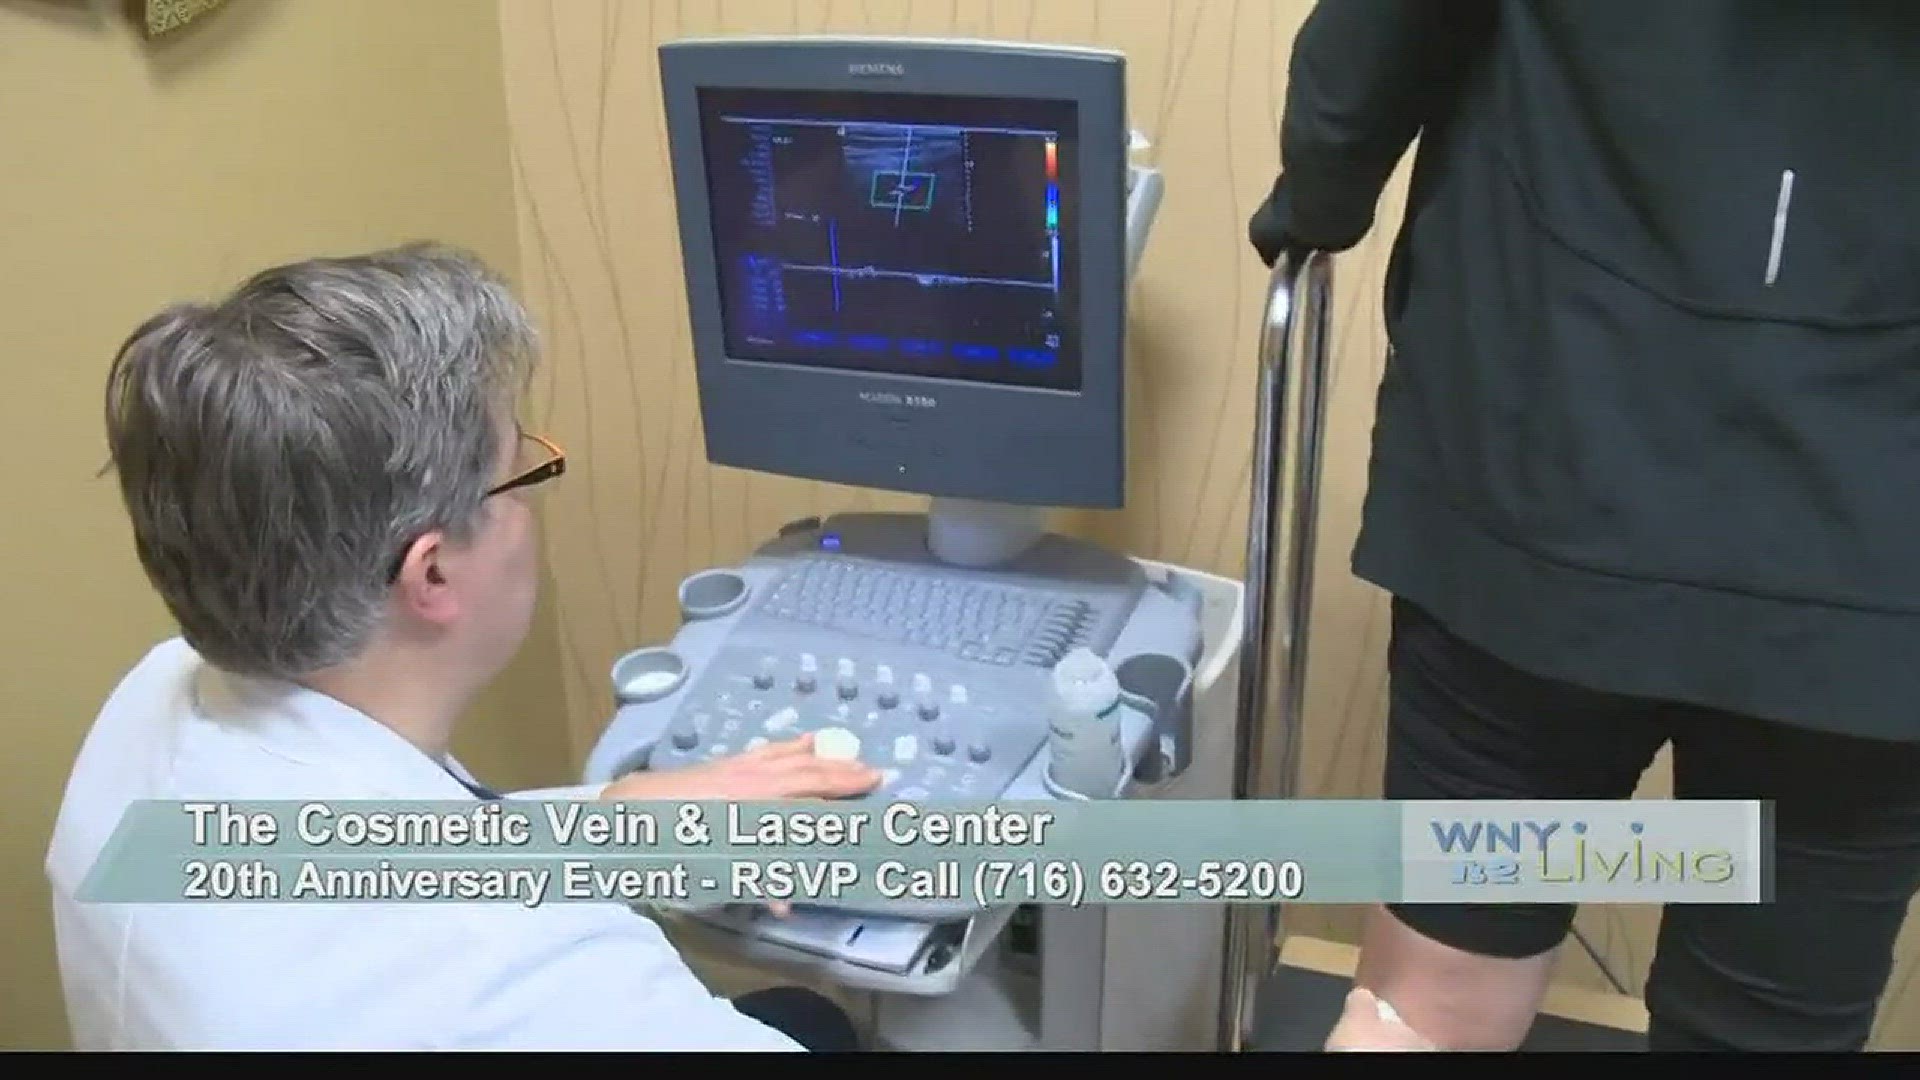 WNY Living - October 7 - The Cosmetic Vein and Laser Center